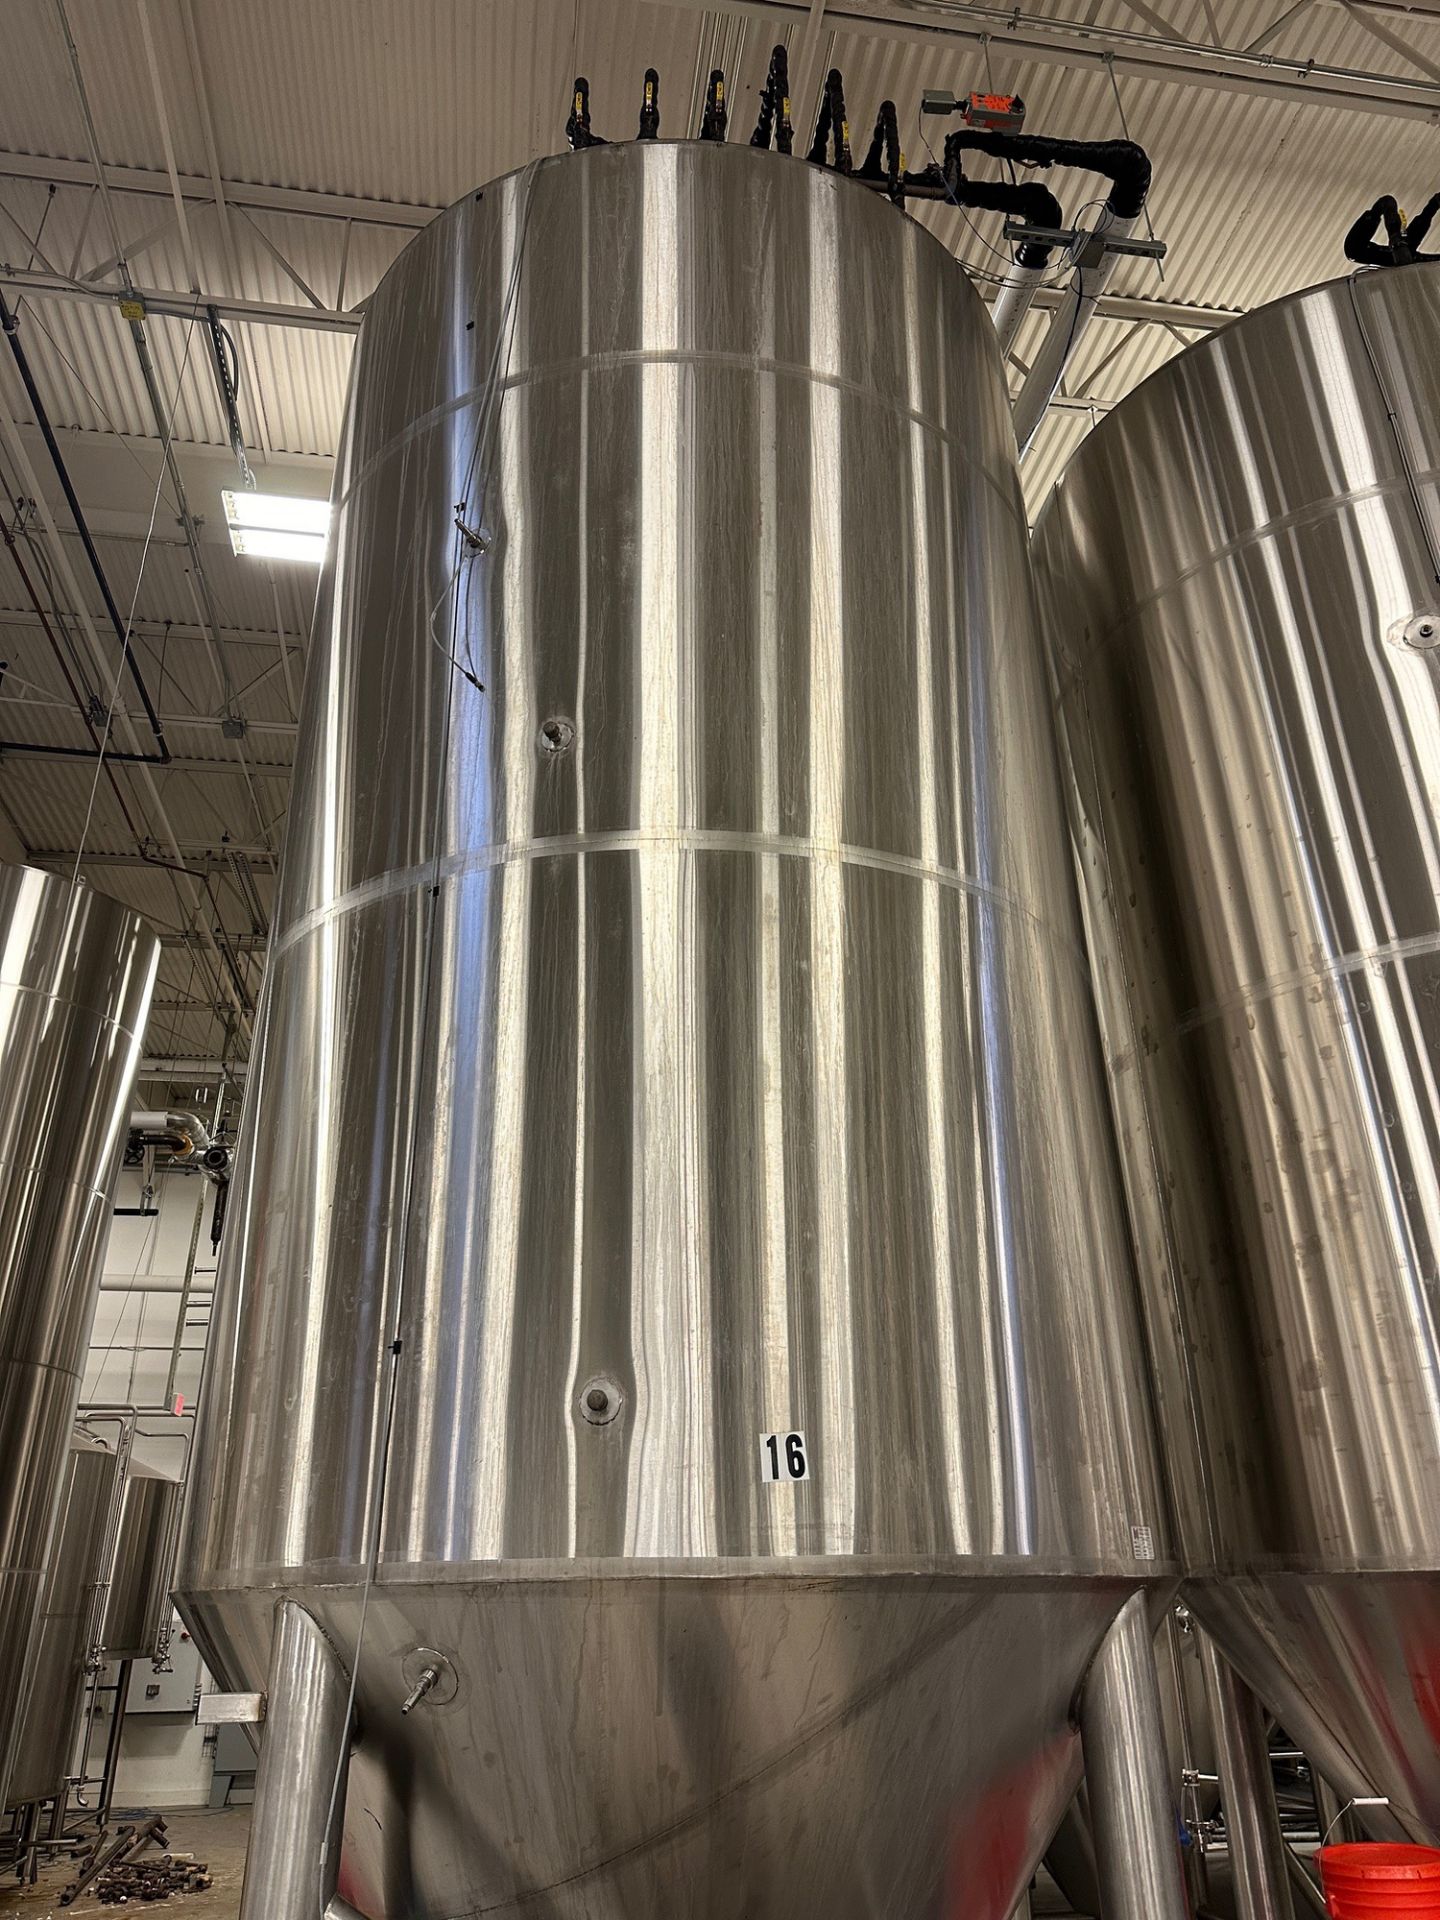 (1 of 8) 2020 Marks 132 BBL FV / 175 BBL or 5400 Gal Max Capacity Fermentation Tank | Rig Fee $2620 - Image 3 of 4